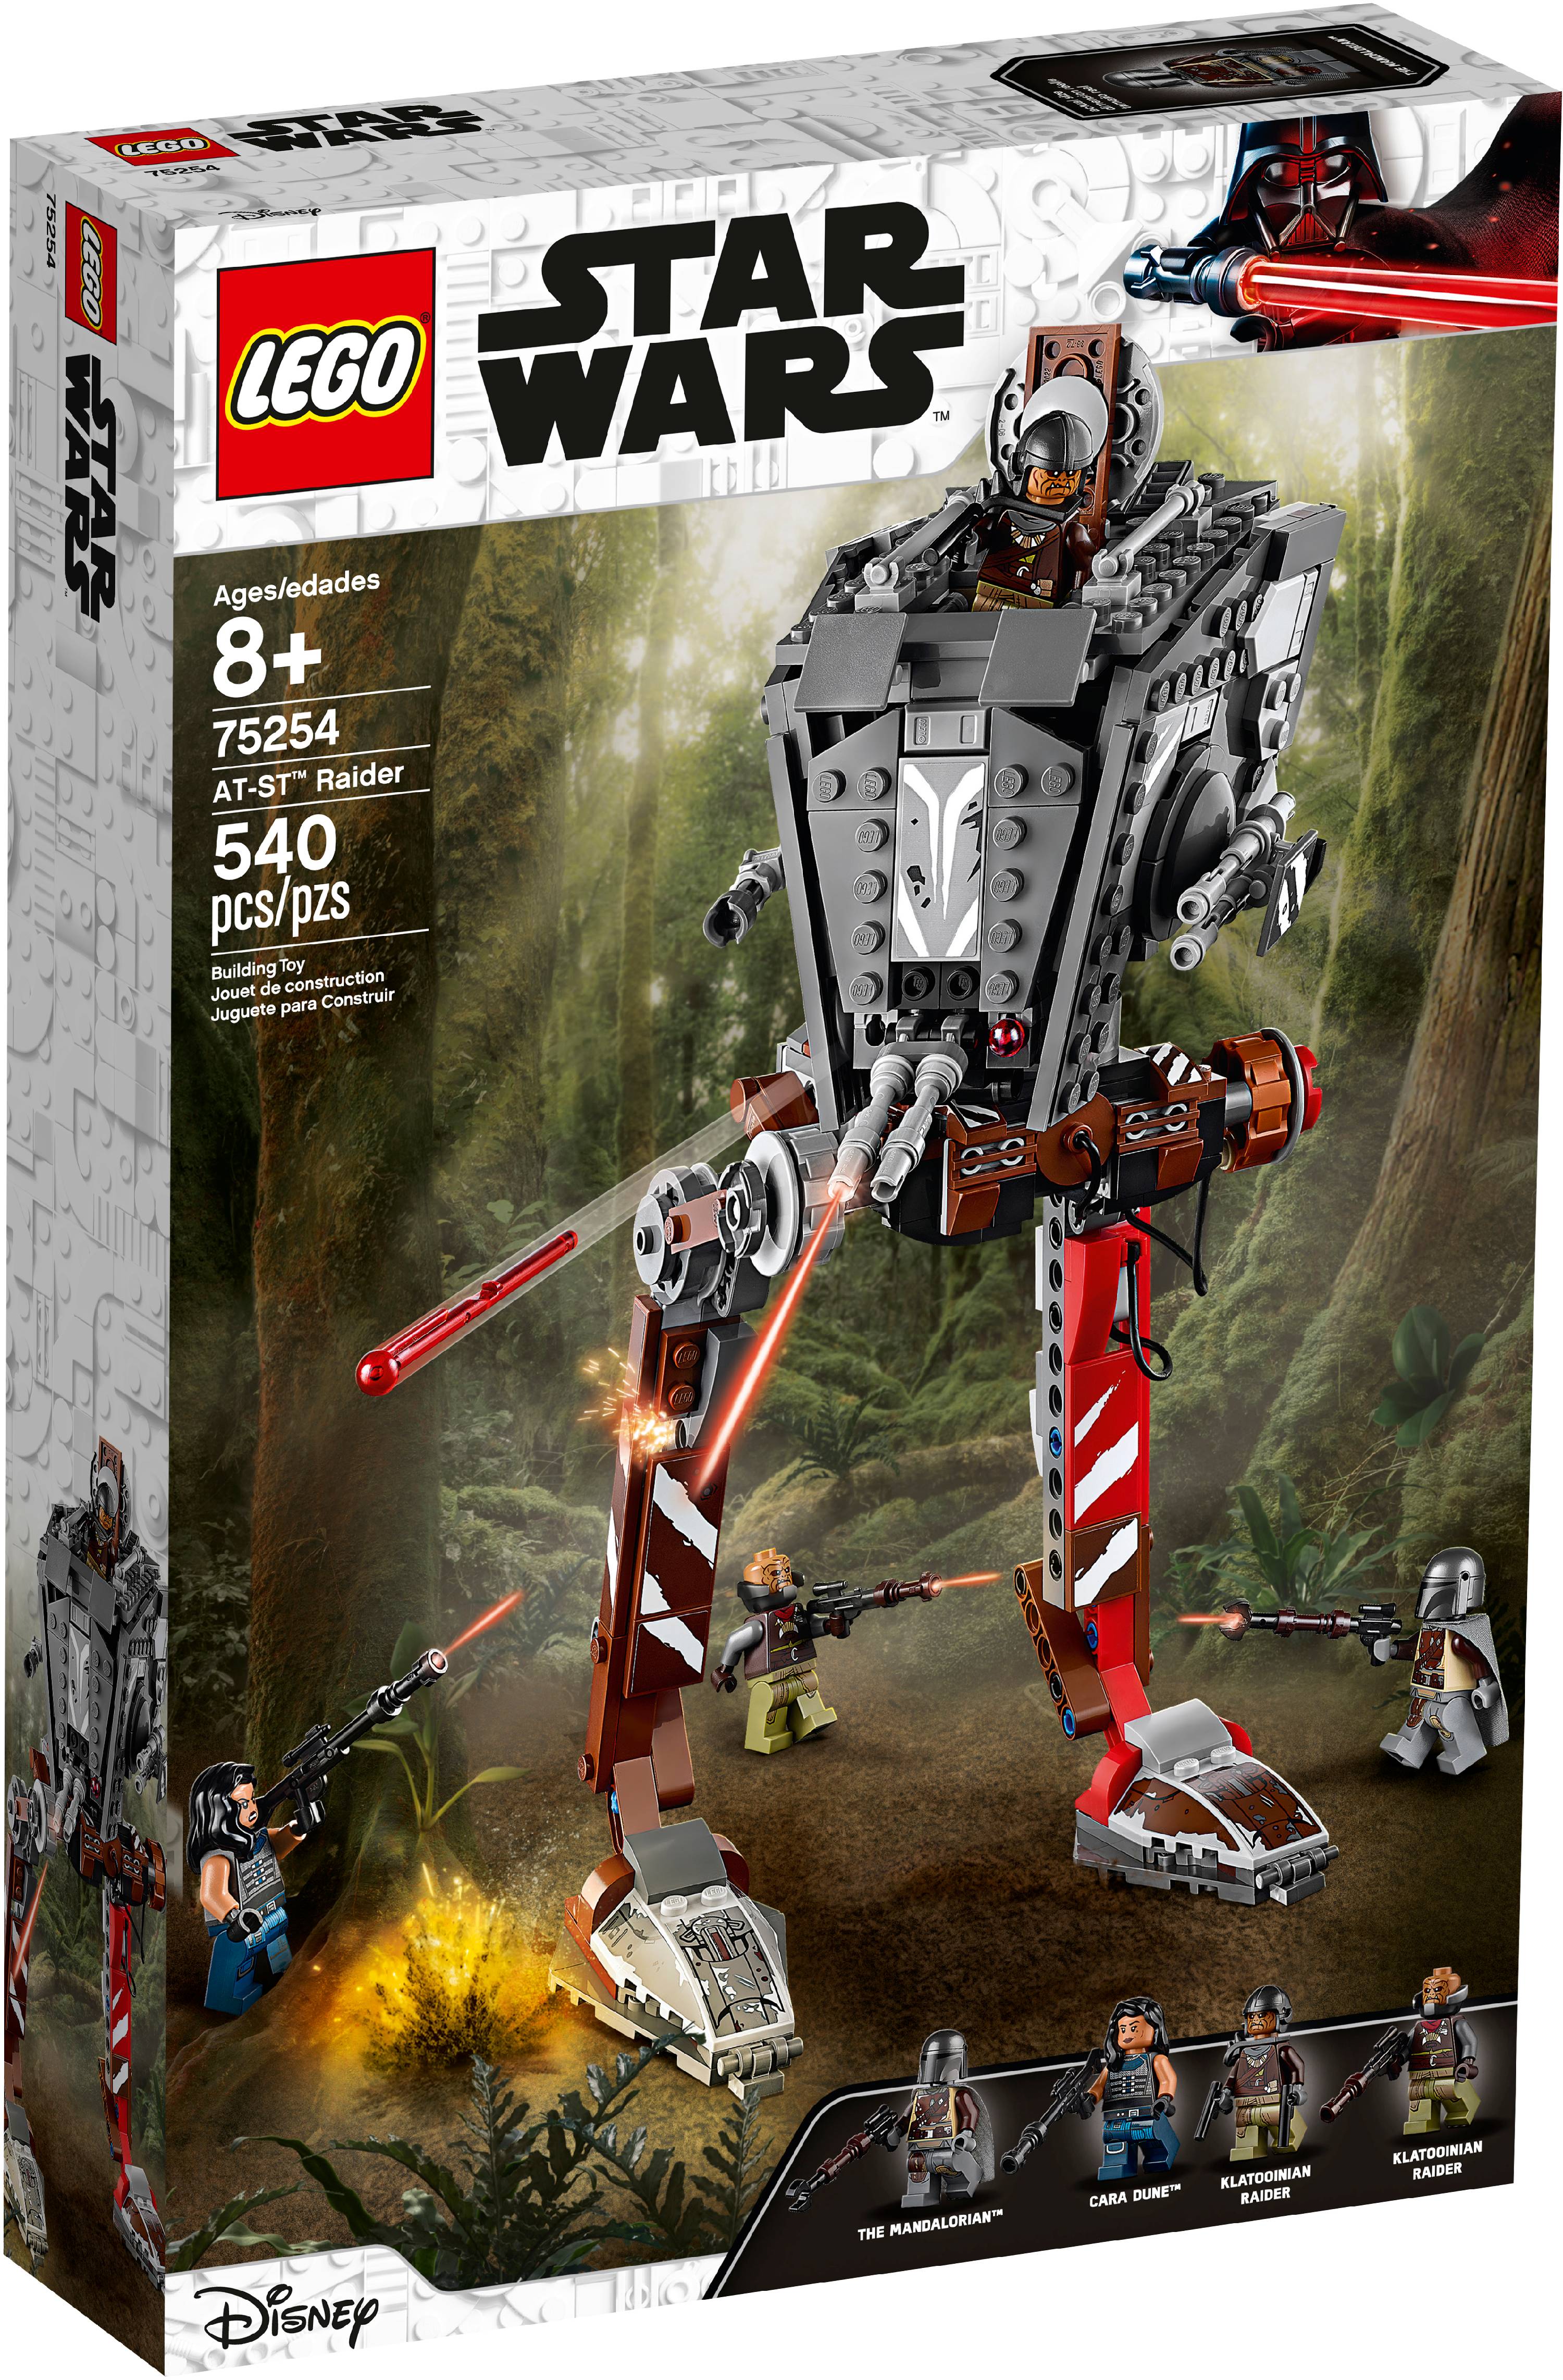 LEGO Star Wars AT-ST Raider 75254 Building Set (540 Pieces) - image 5 of 8